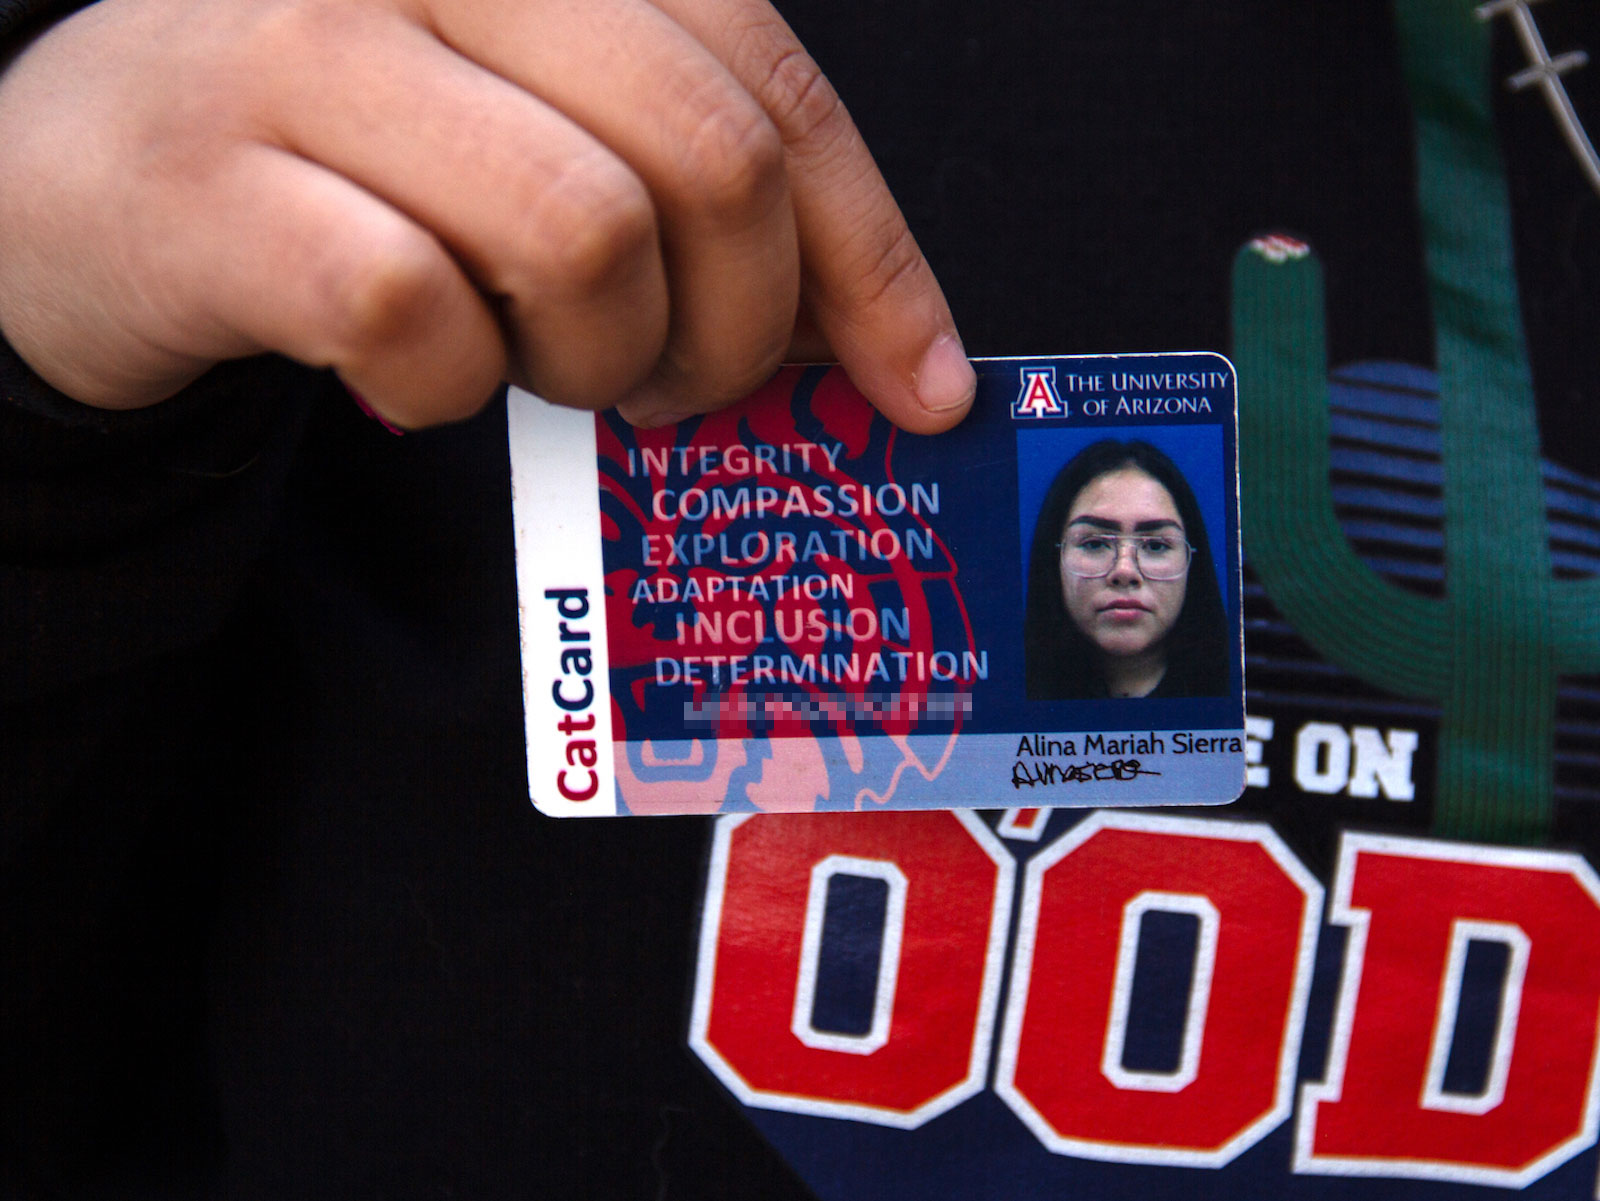 a hand holds a university of arizona ID card with a woman’s photo and the word “CatCard”